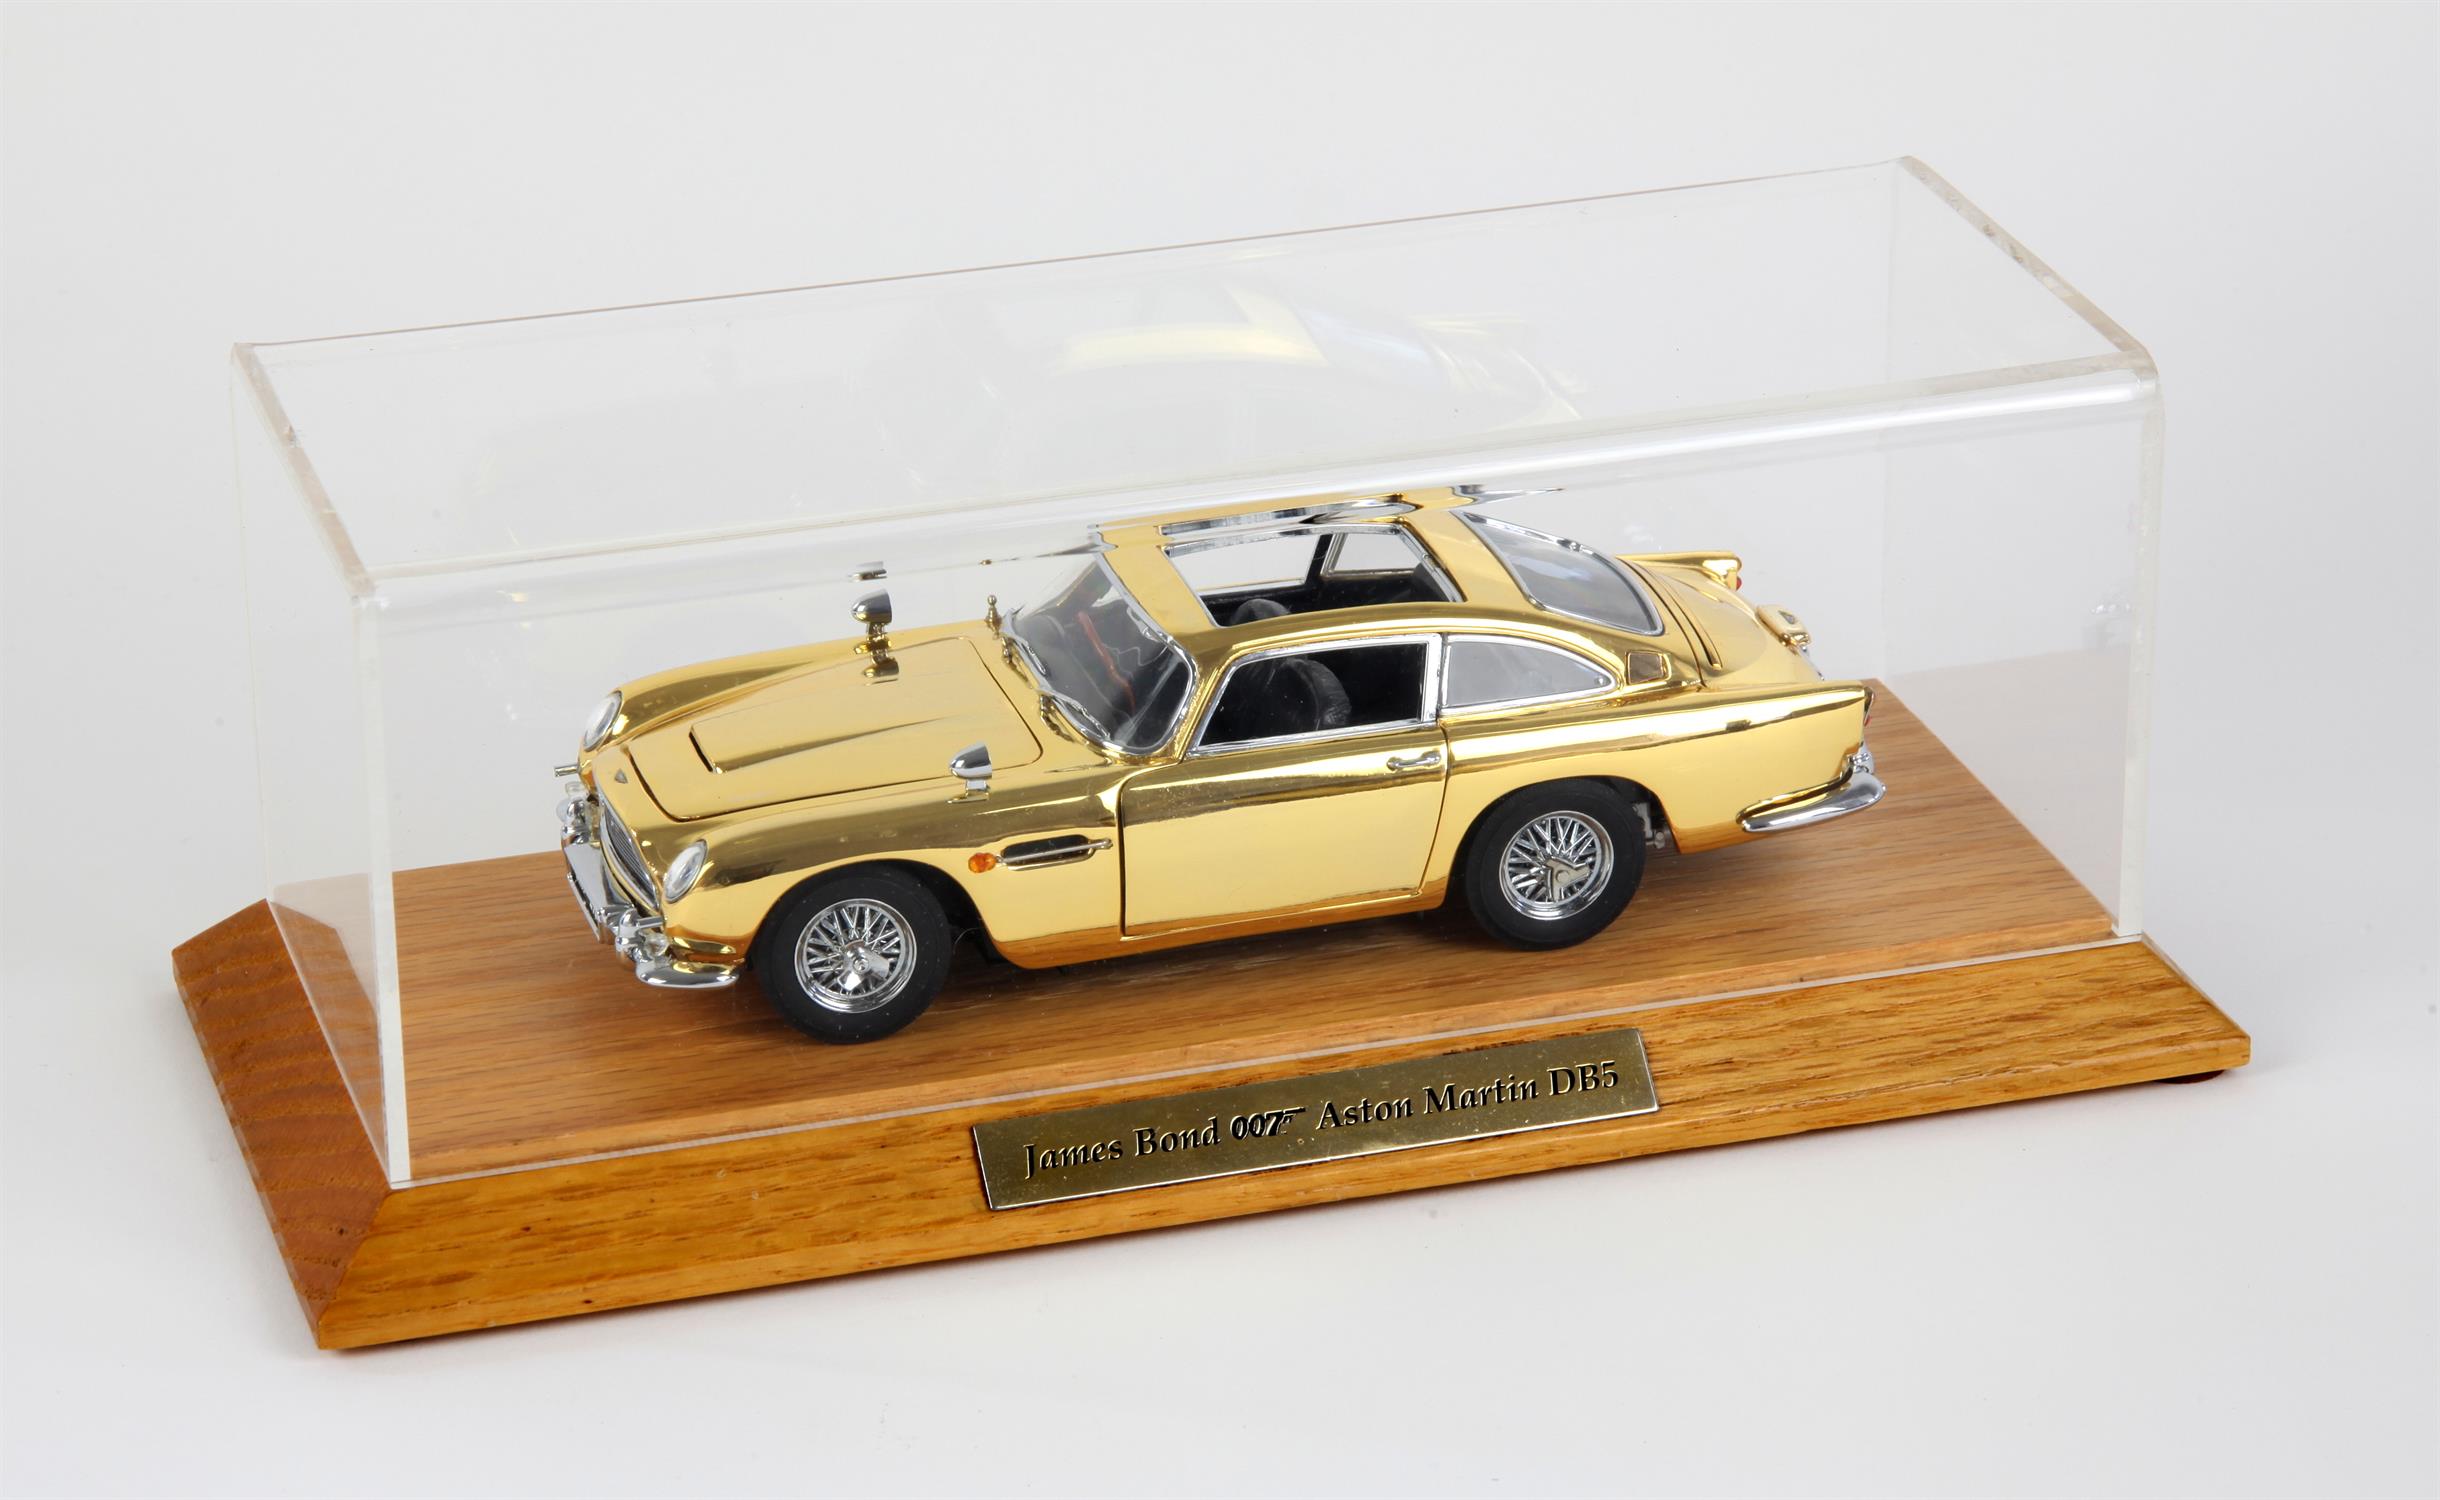 James Bond 007 - Danbury Mint Special Edition Aston Martin DB5 1:24 scale model, gold plated,